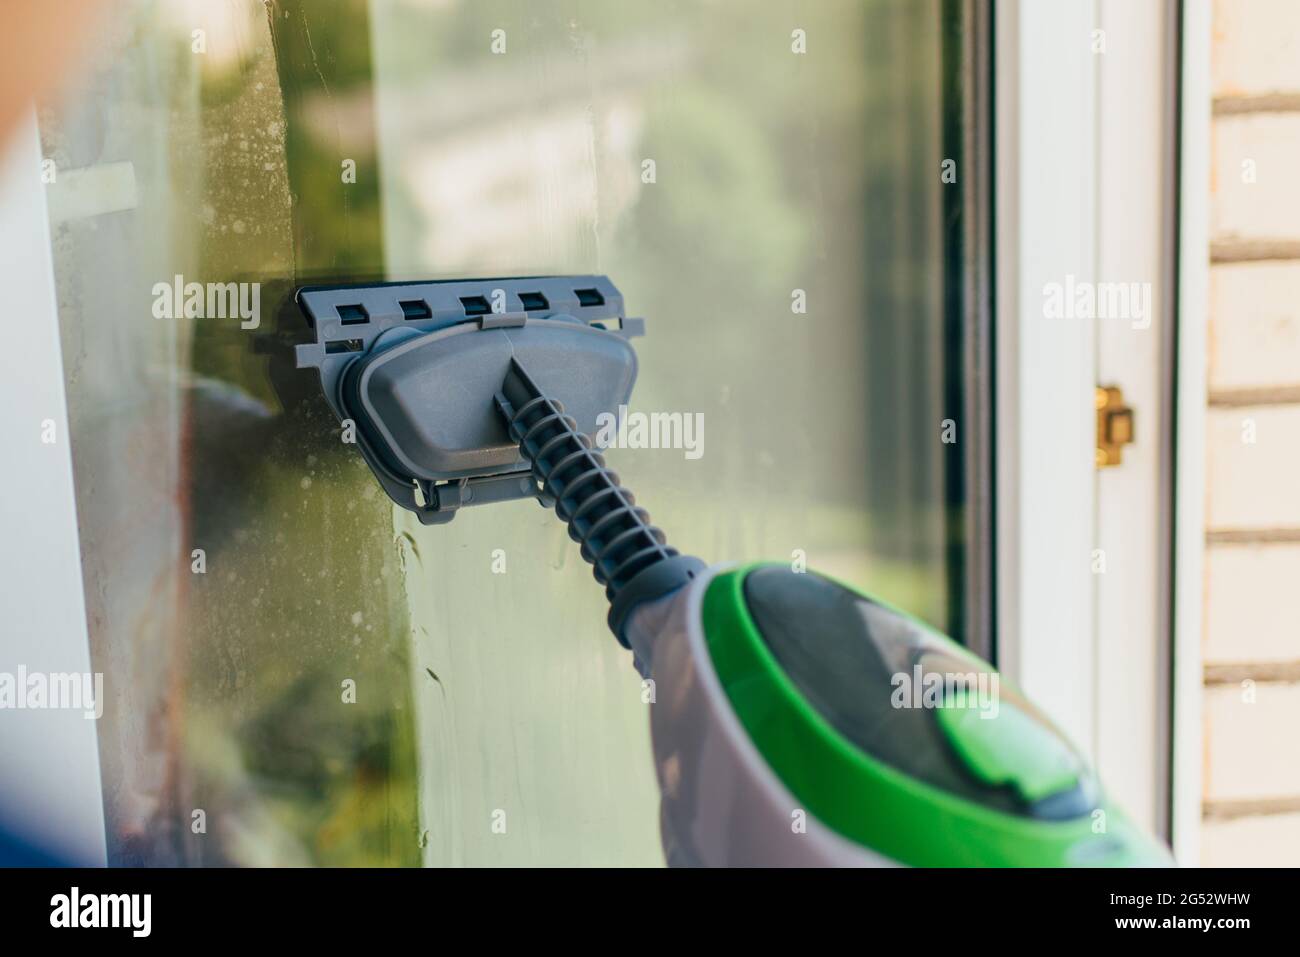 Steam Cleaning Windows with Pressure Editorial Photography - Image